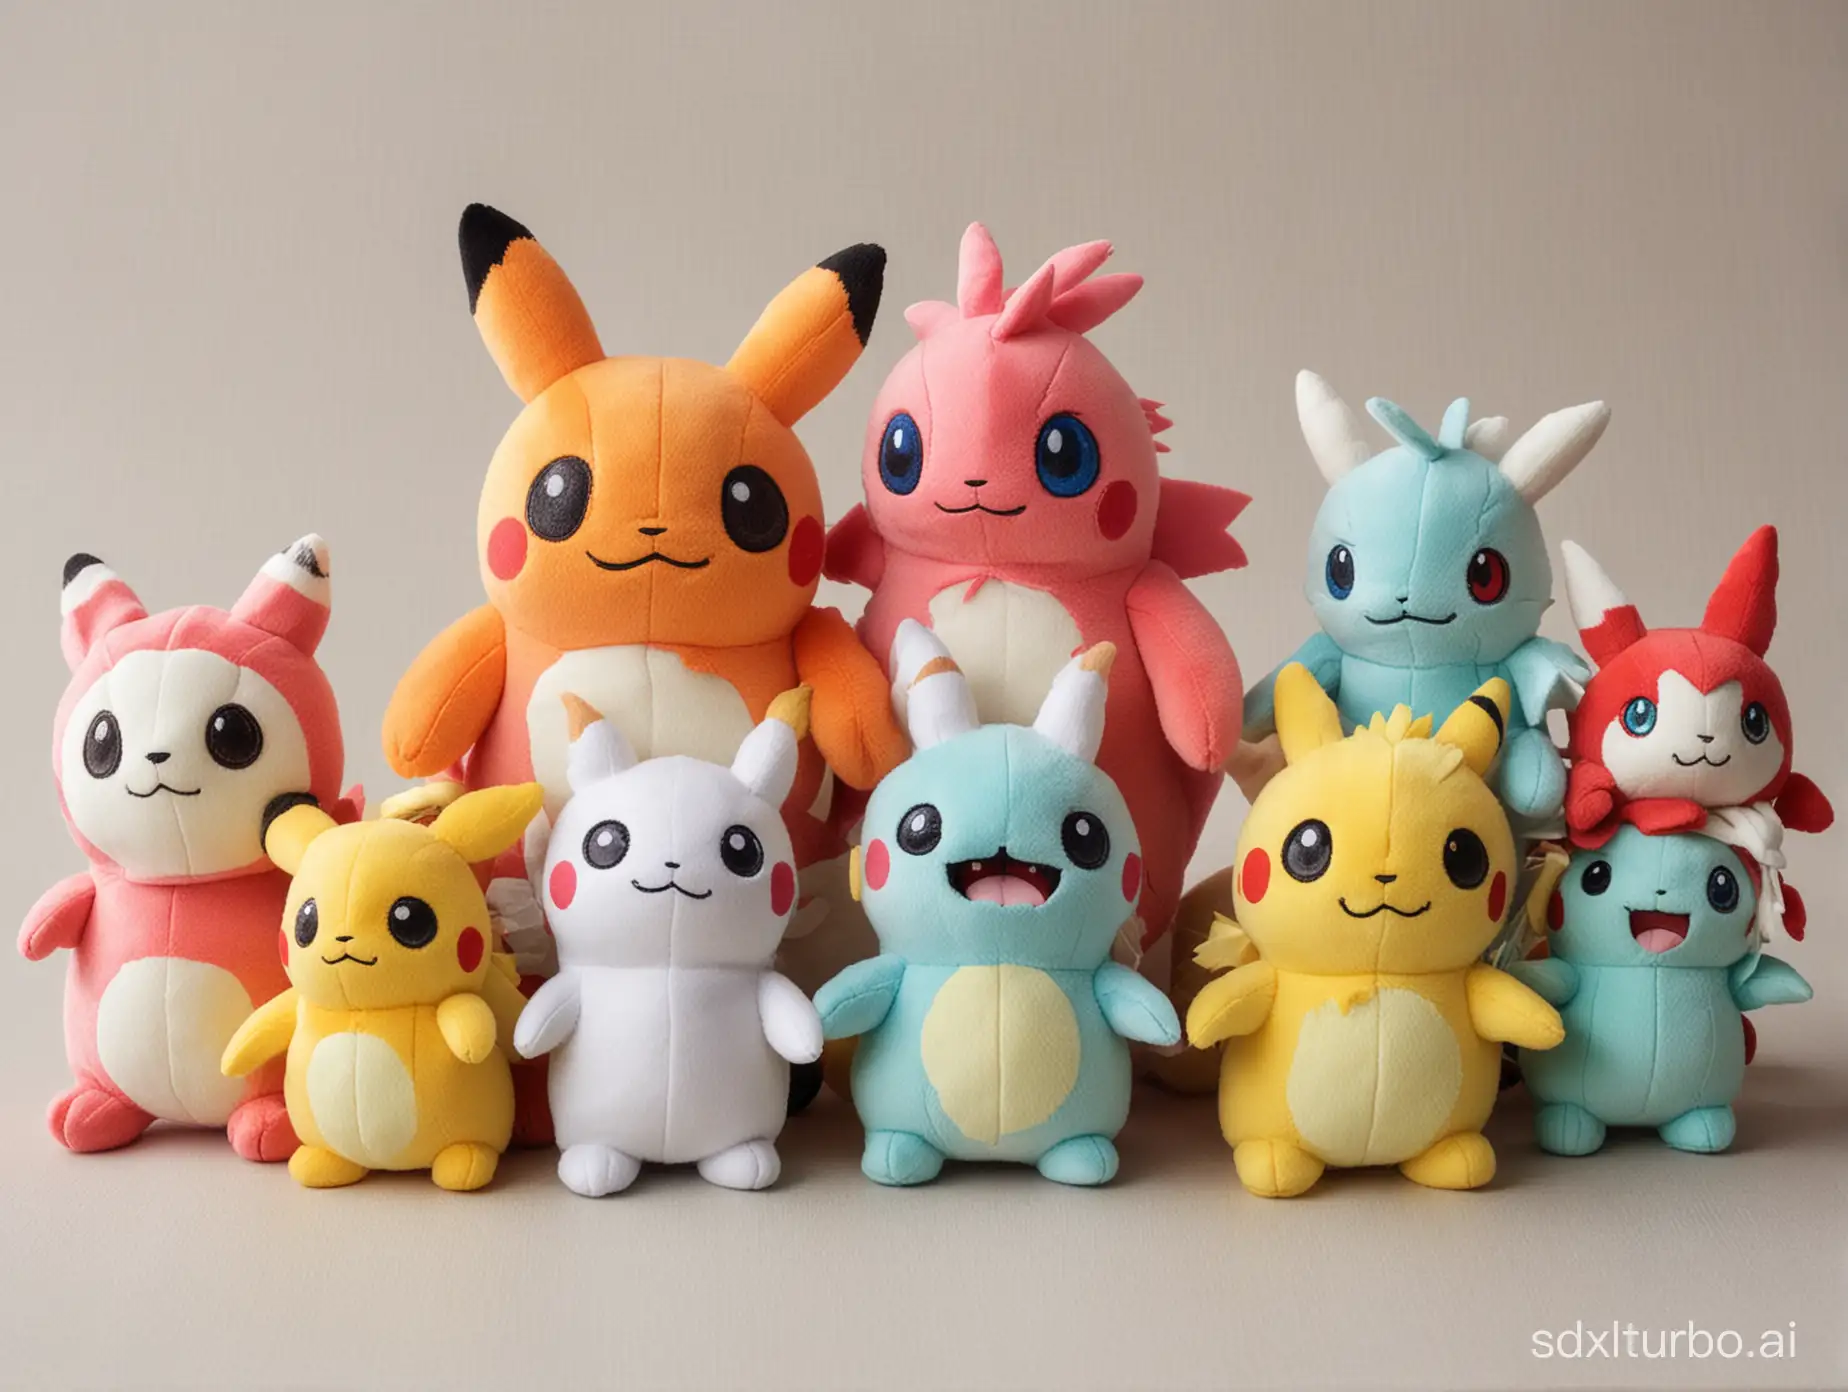 Whimsical-Plush-Doll-Compilation-Pokmon-Monsters-and-Playful-Stuffed-Characters